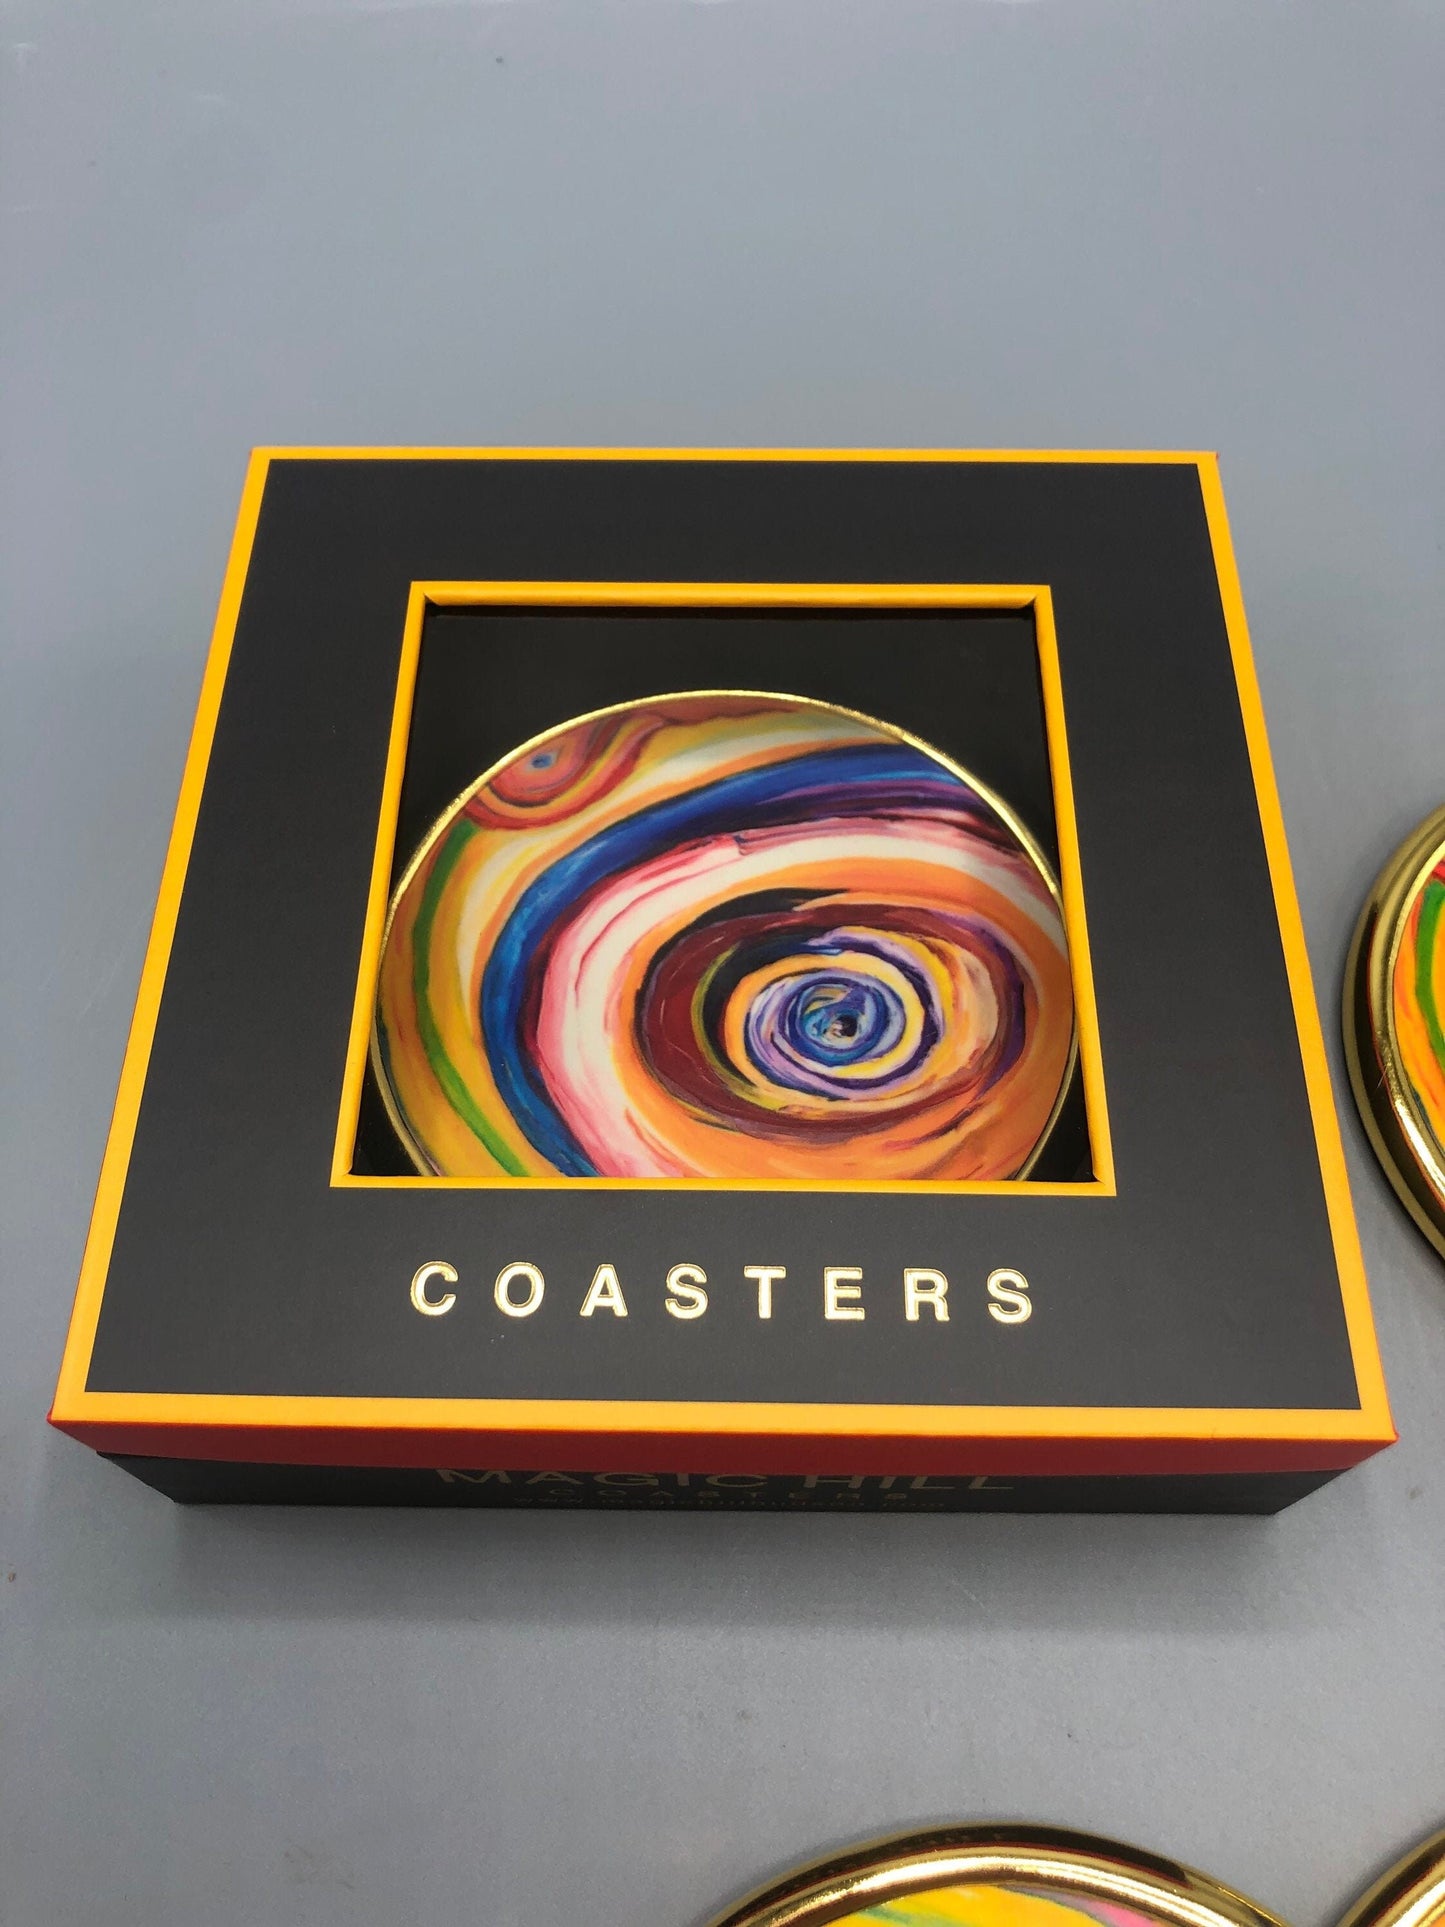 Handmade ceramic coasters with brass trim and velvet on the bottom. art by Bruce Mishell Exclusivity sold by Magic Hill Hudson. 4” inches